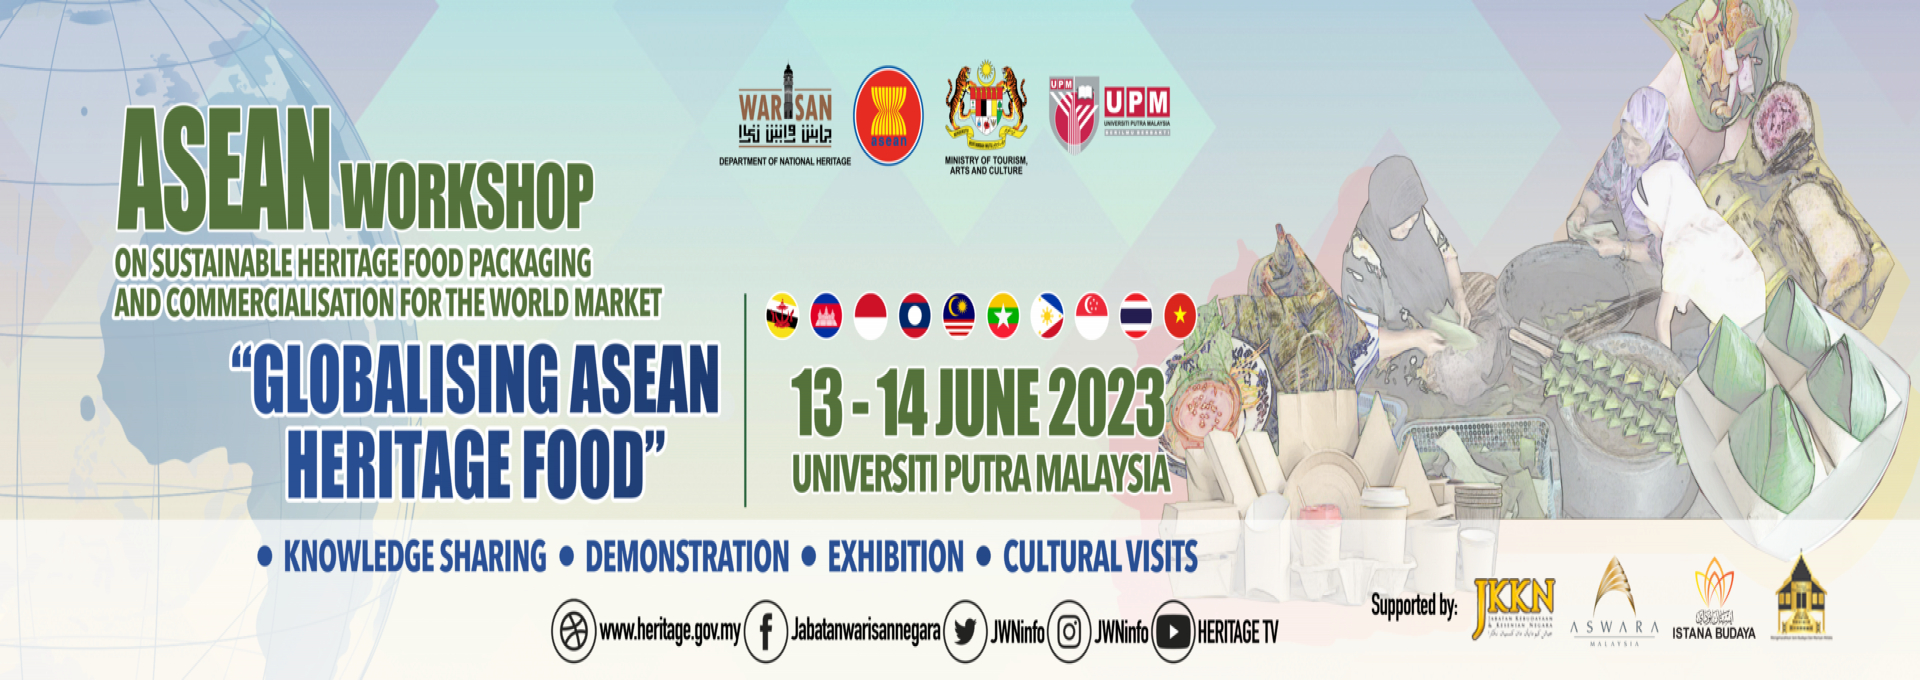 ASEAN Workshop on Sustainable Heritage Food Packaging and Commercialisation For The World Market